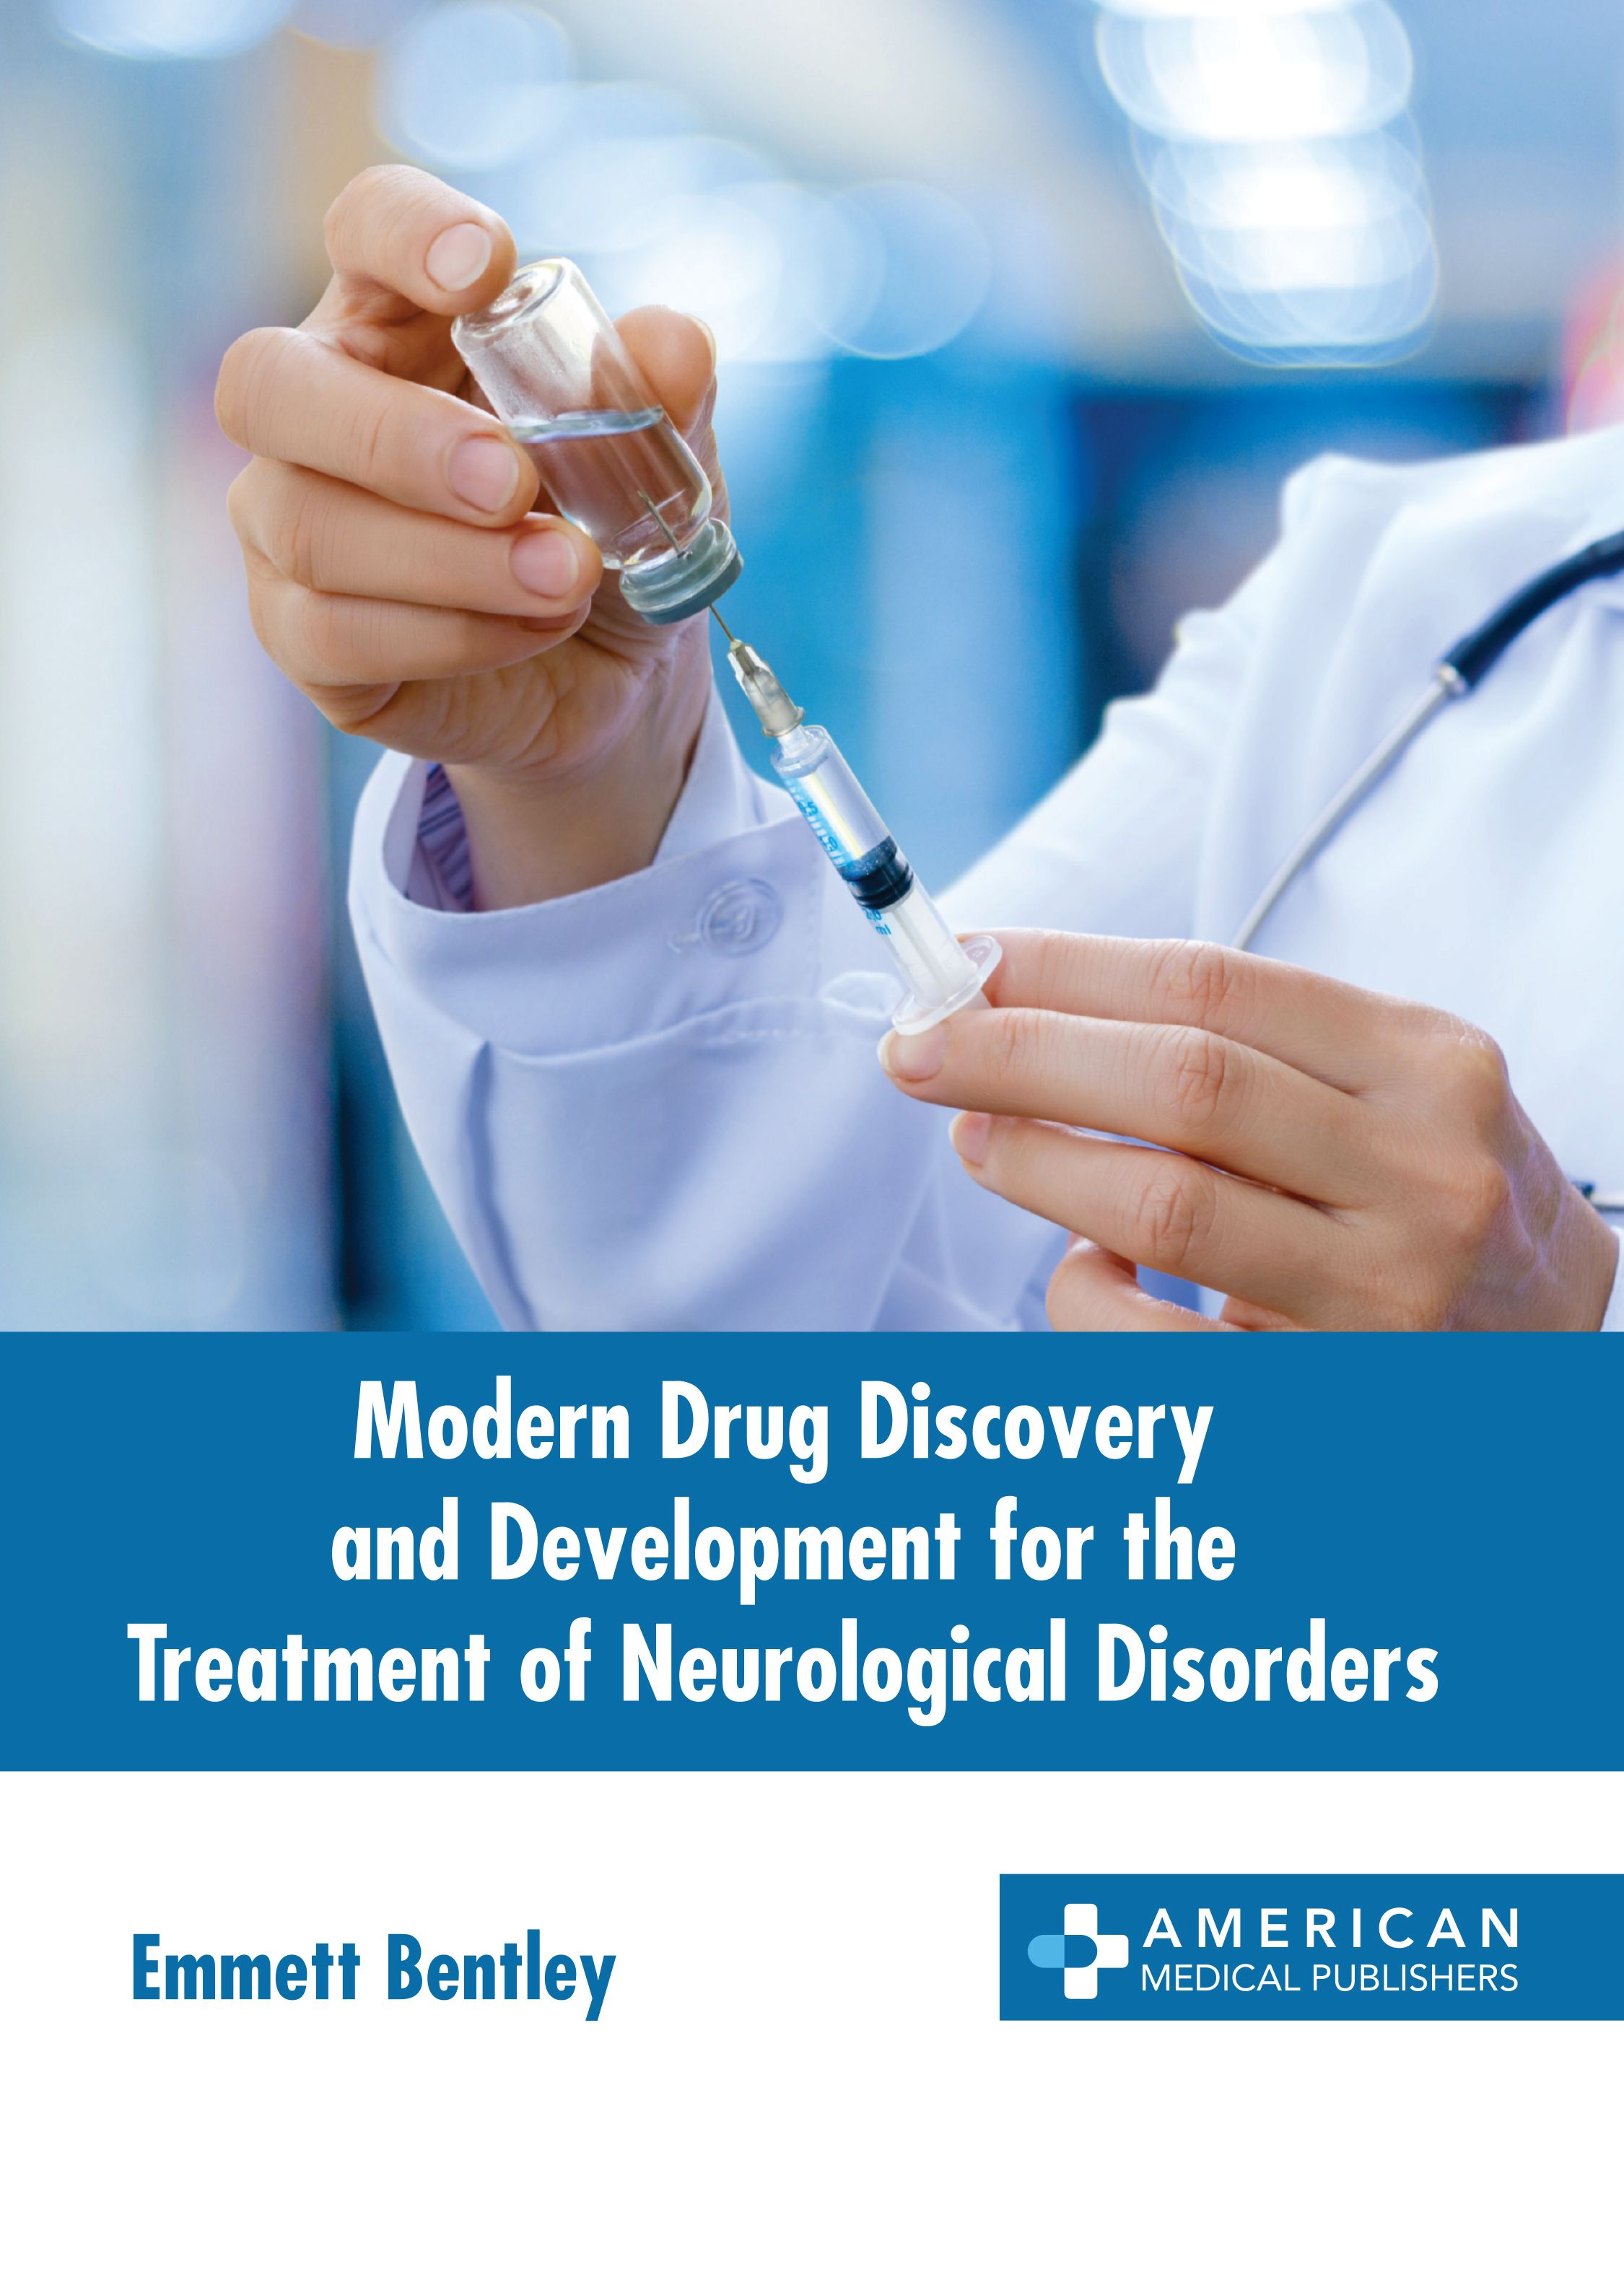 MODERN DRUG DISCOVERY AND DEVELOPMENT FOR THE TREATMENT OF NEUROLOGICAL DISORDERS